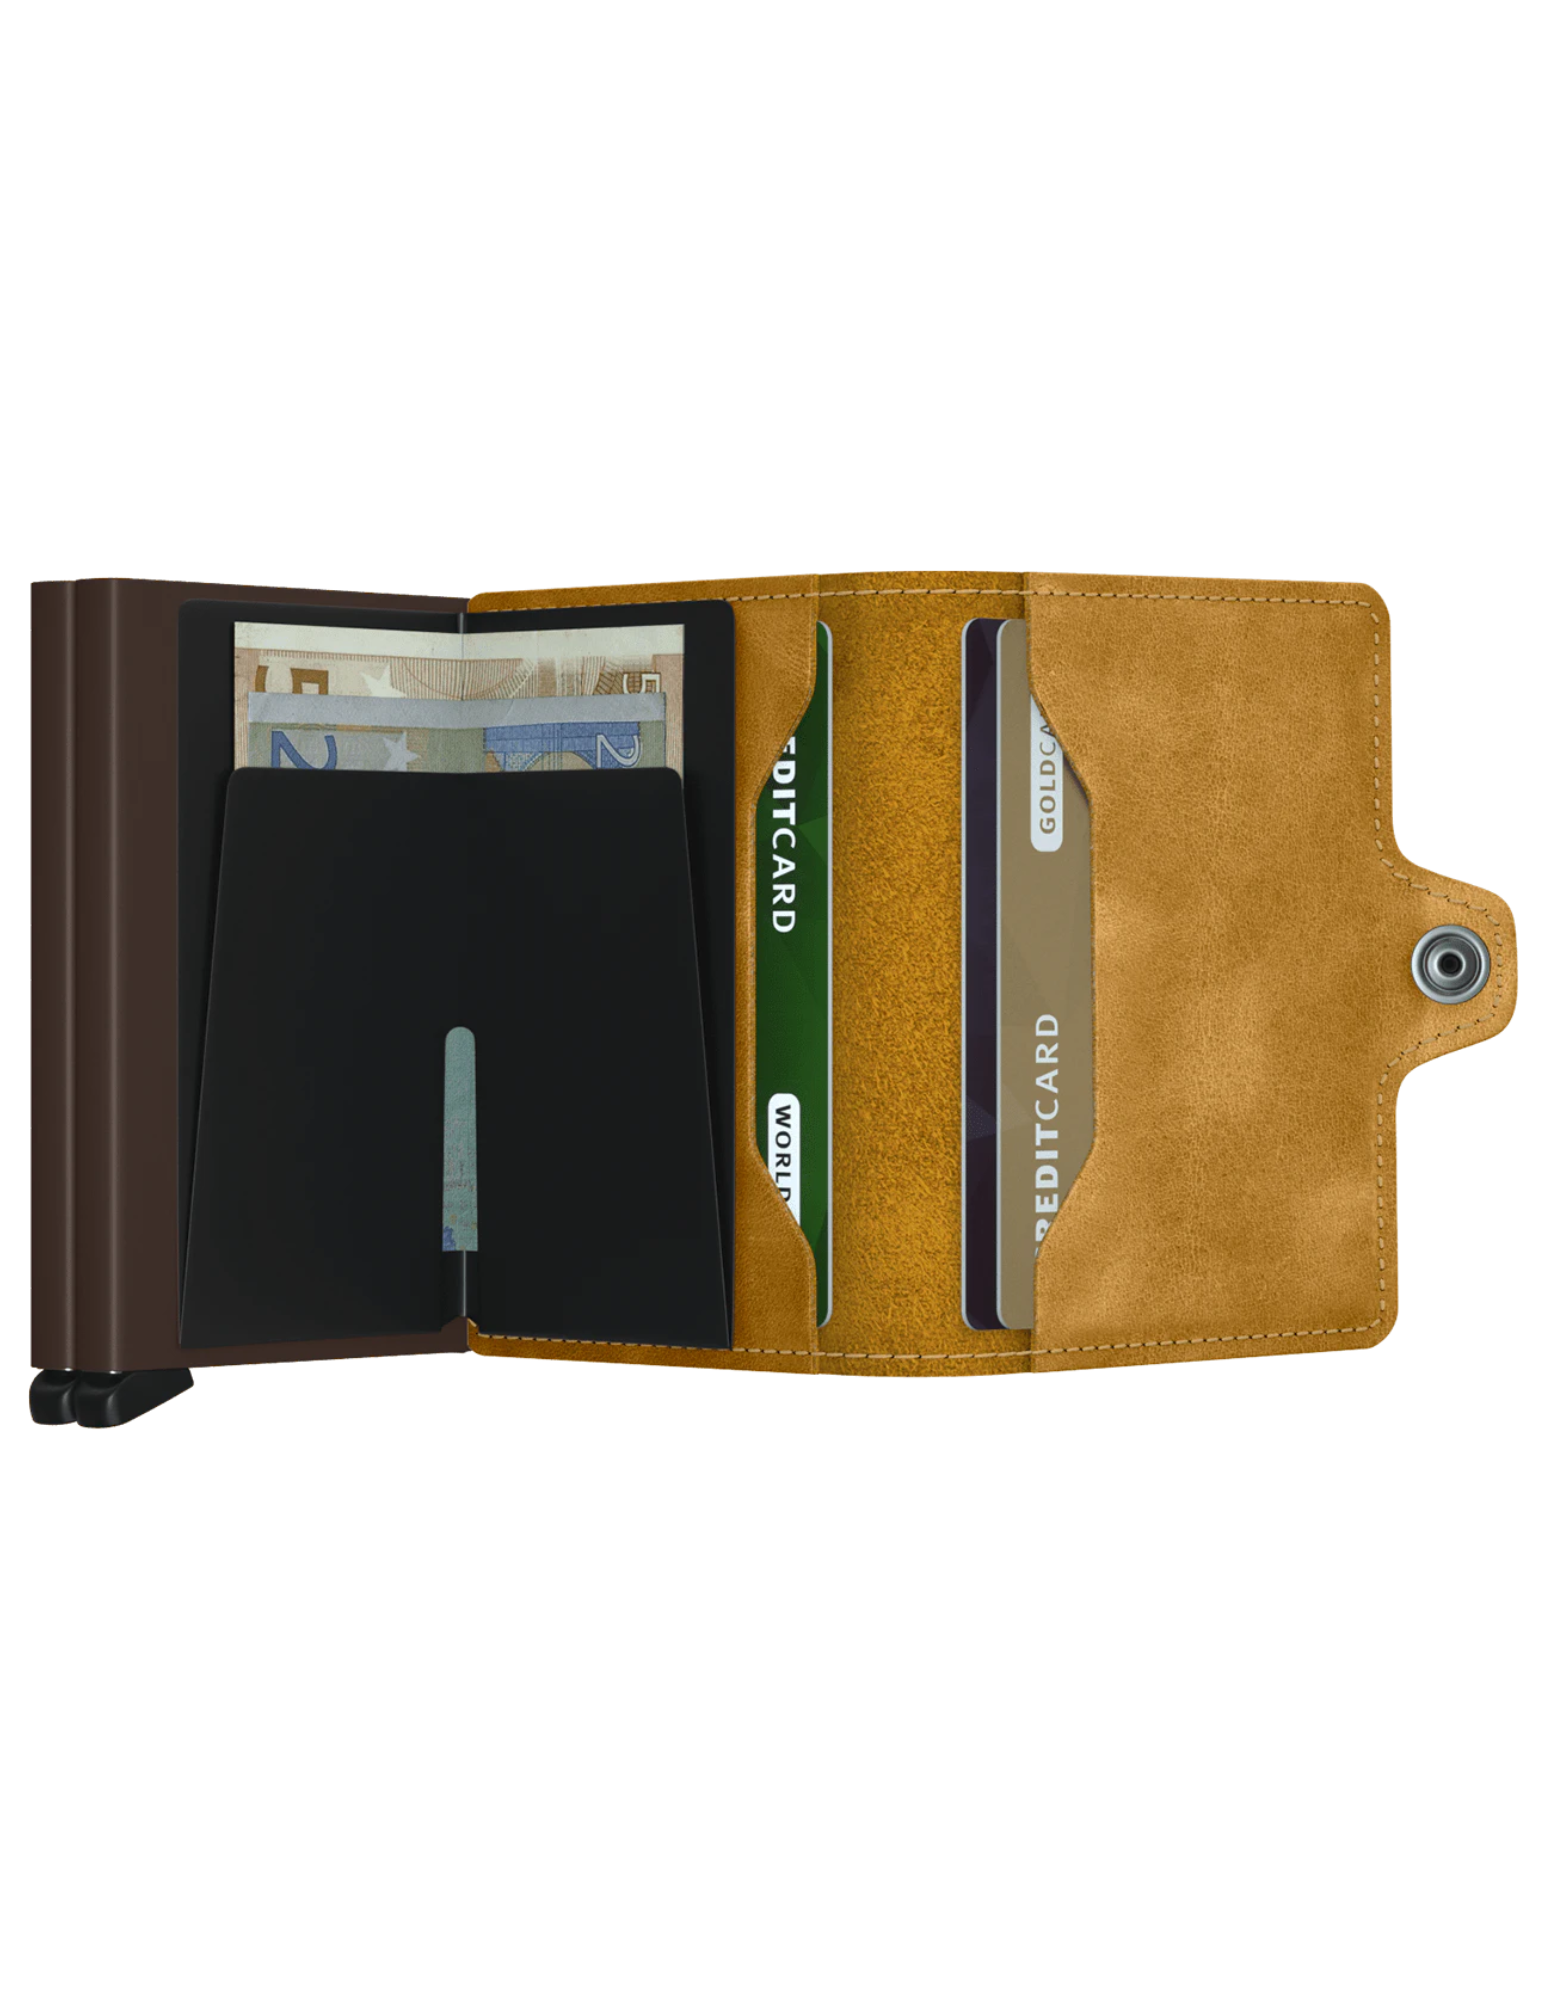 With two Cardprotectors to hold double the content, the Twinwallet carries up to 16 cards, banknotes and receipts, but remains compact in size. Together with its sturdy closure and exterior, to hold extra cards, banknotes and receipts, the Twinwallet holds much but remains compact in size.